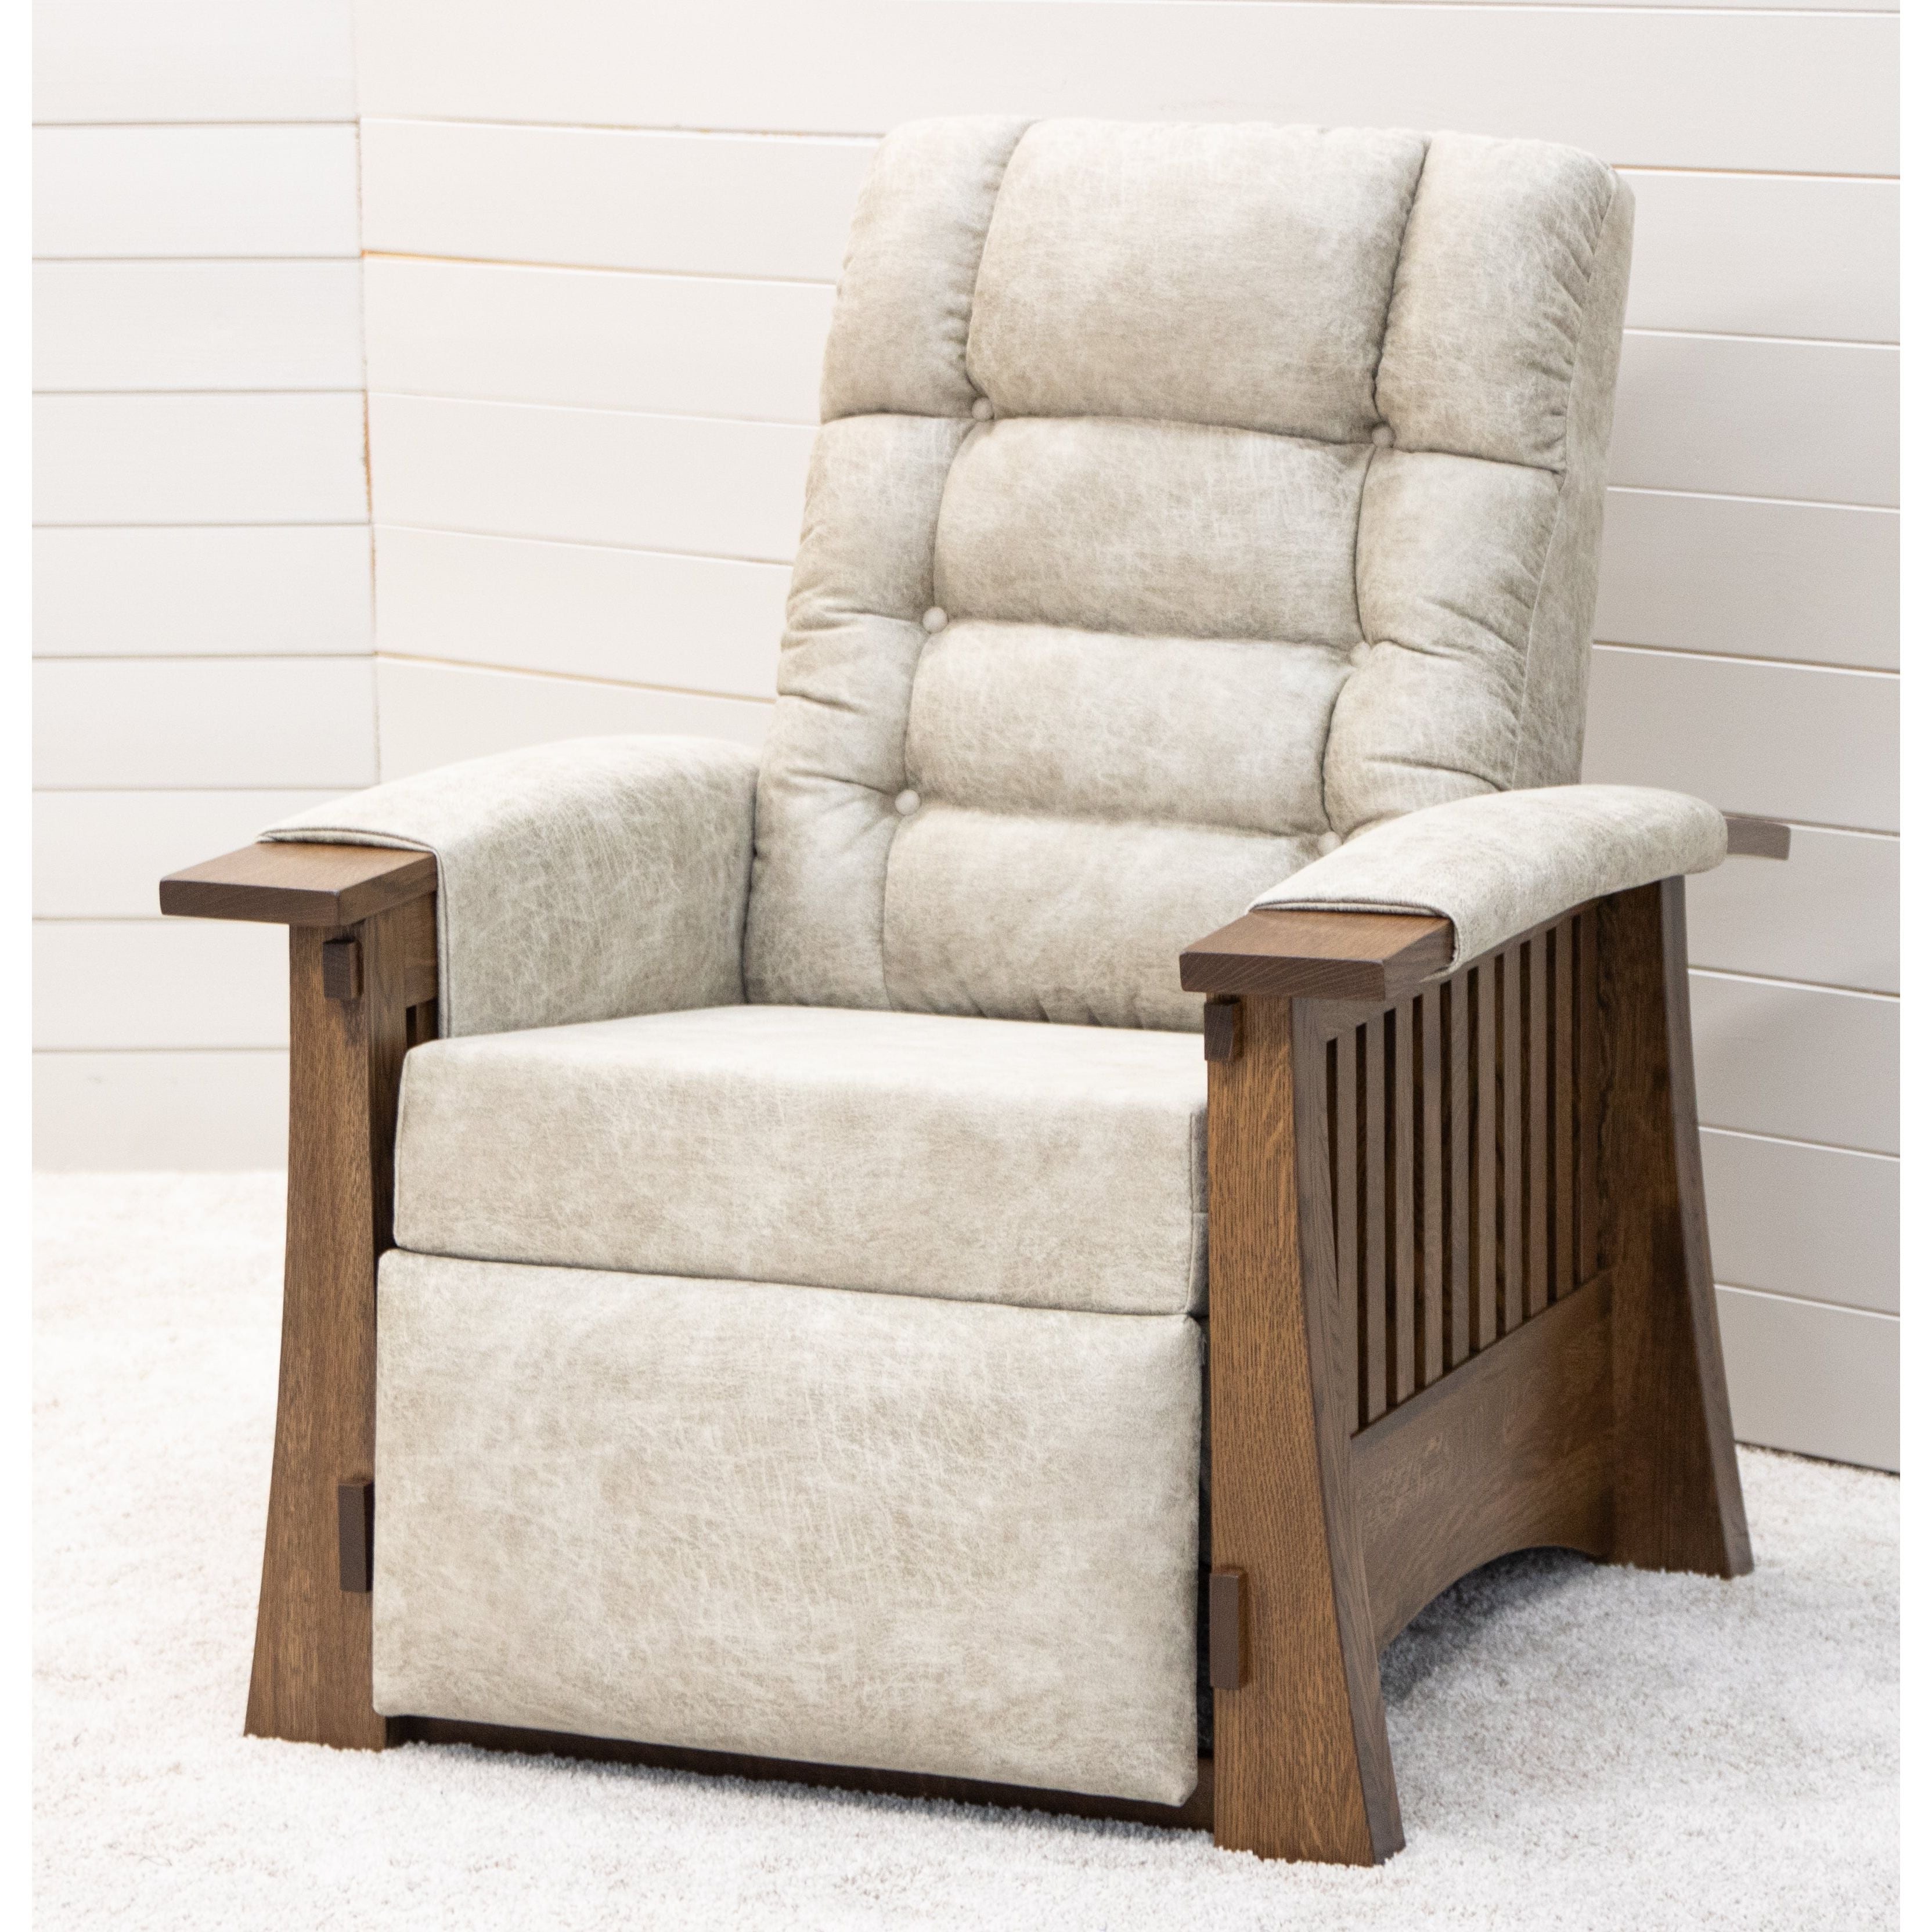 Craftsman Mission Wallhugger Recliner with Wood Arms